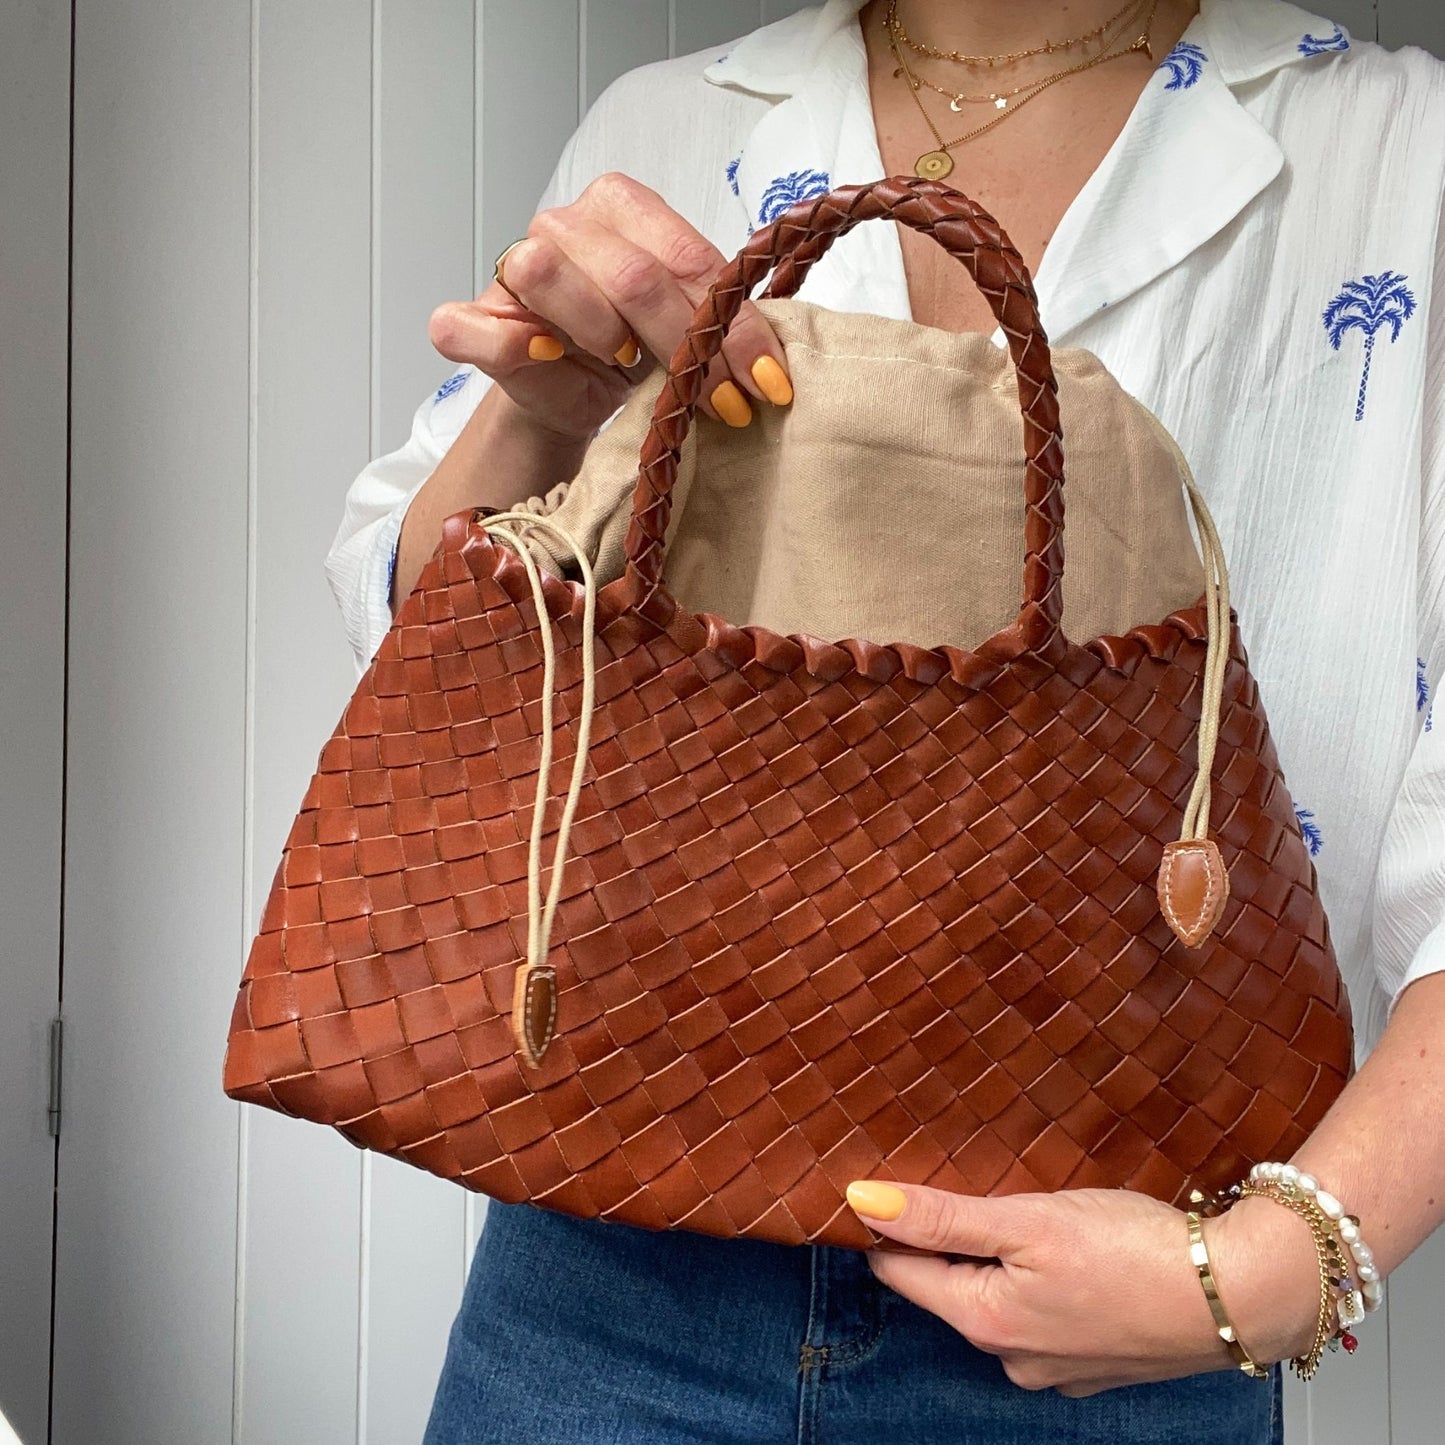 The Woven Leather Hand Held Basket